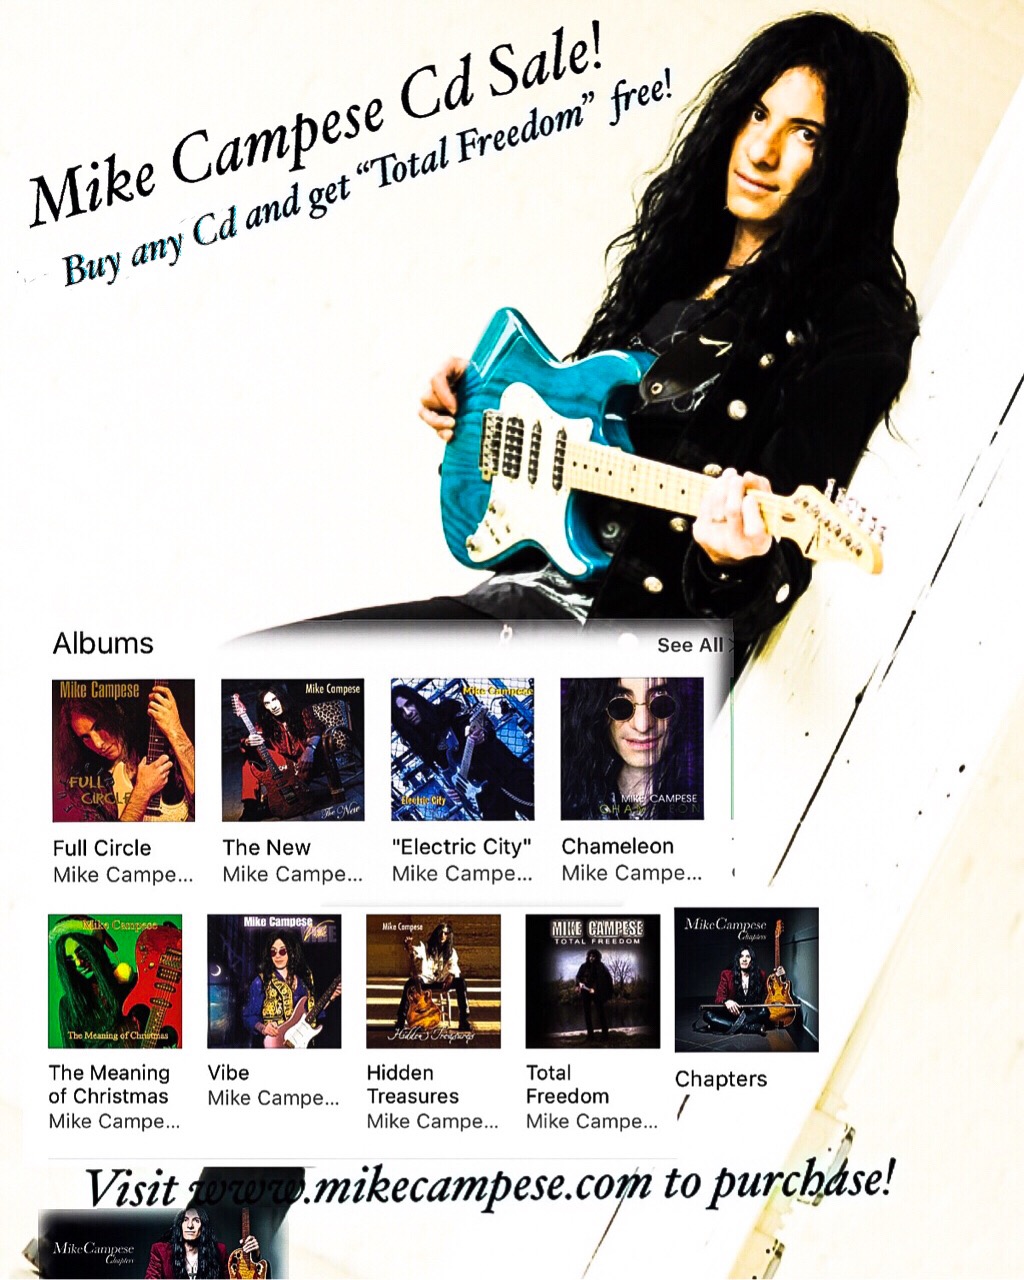 Mike Campese Cd sale Flyer, Buy 1 get Total Freedom Free.